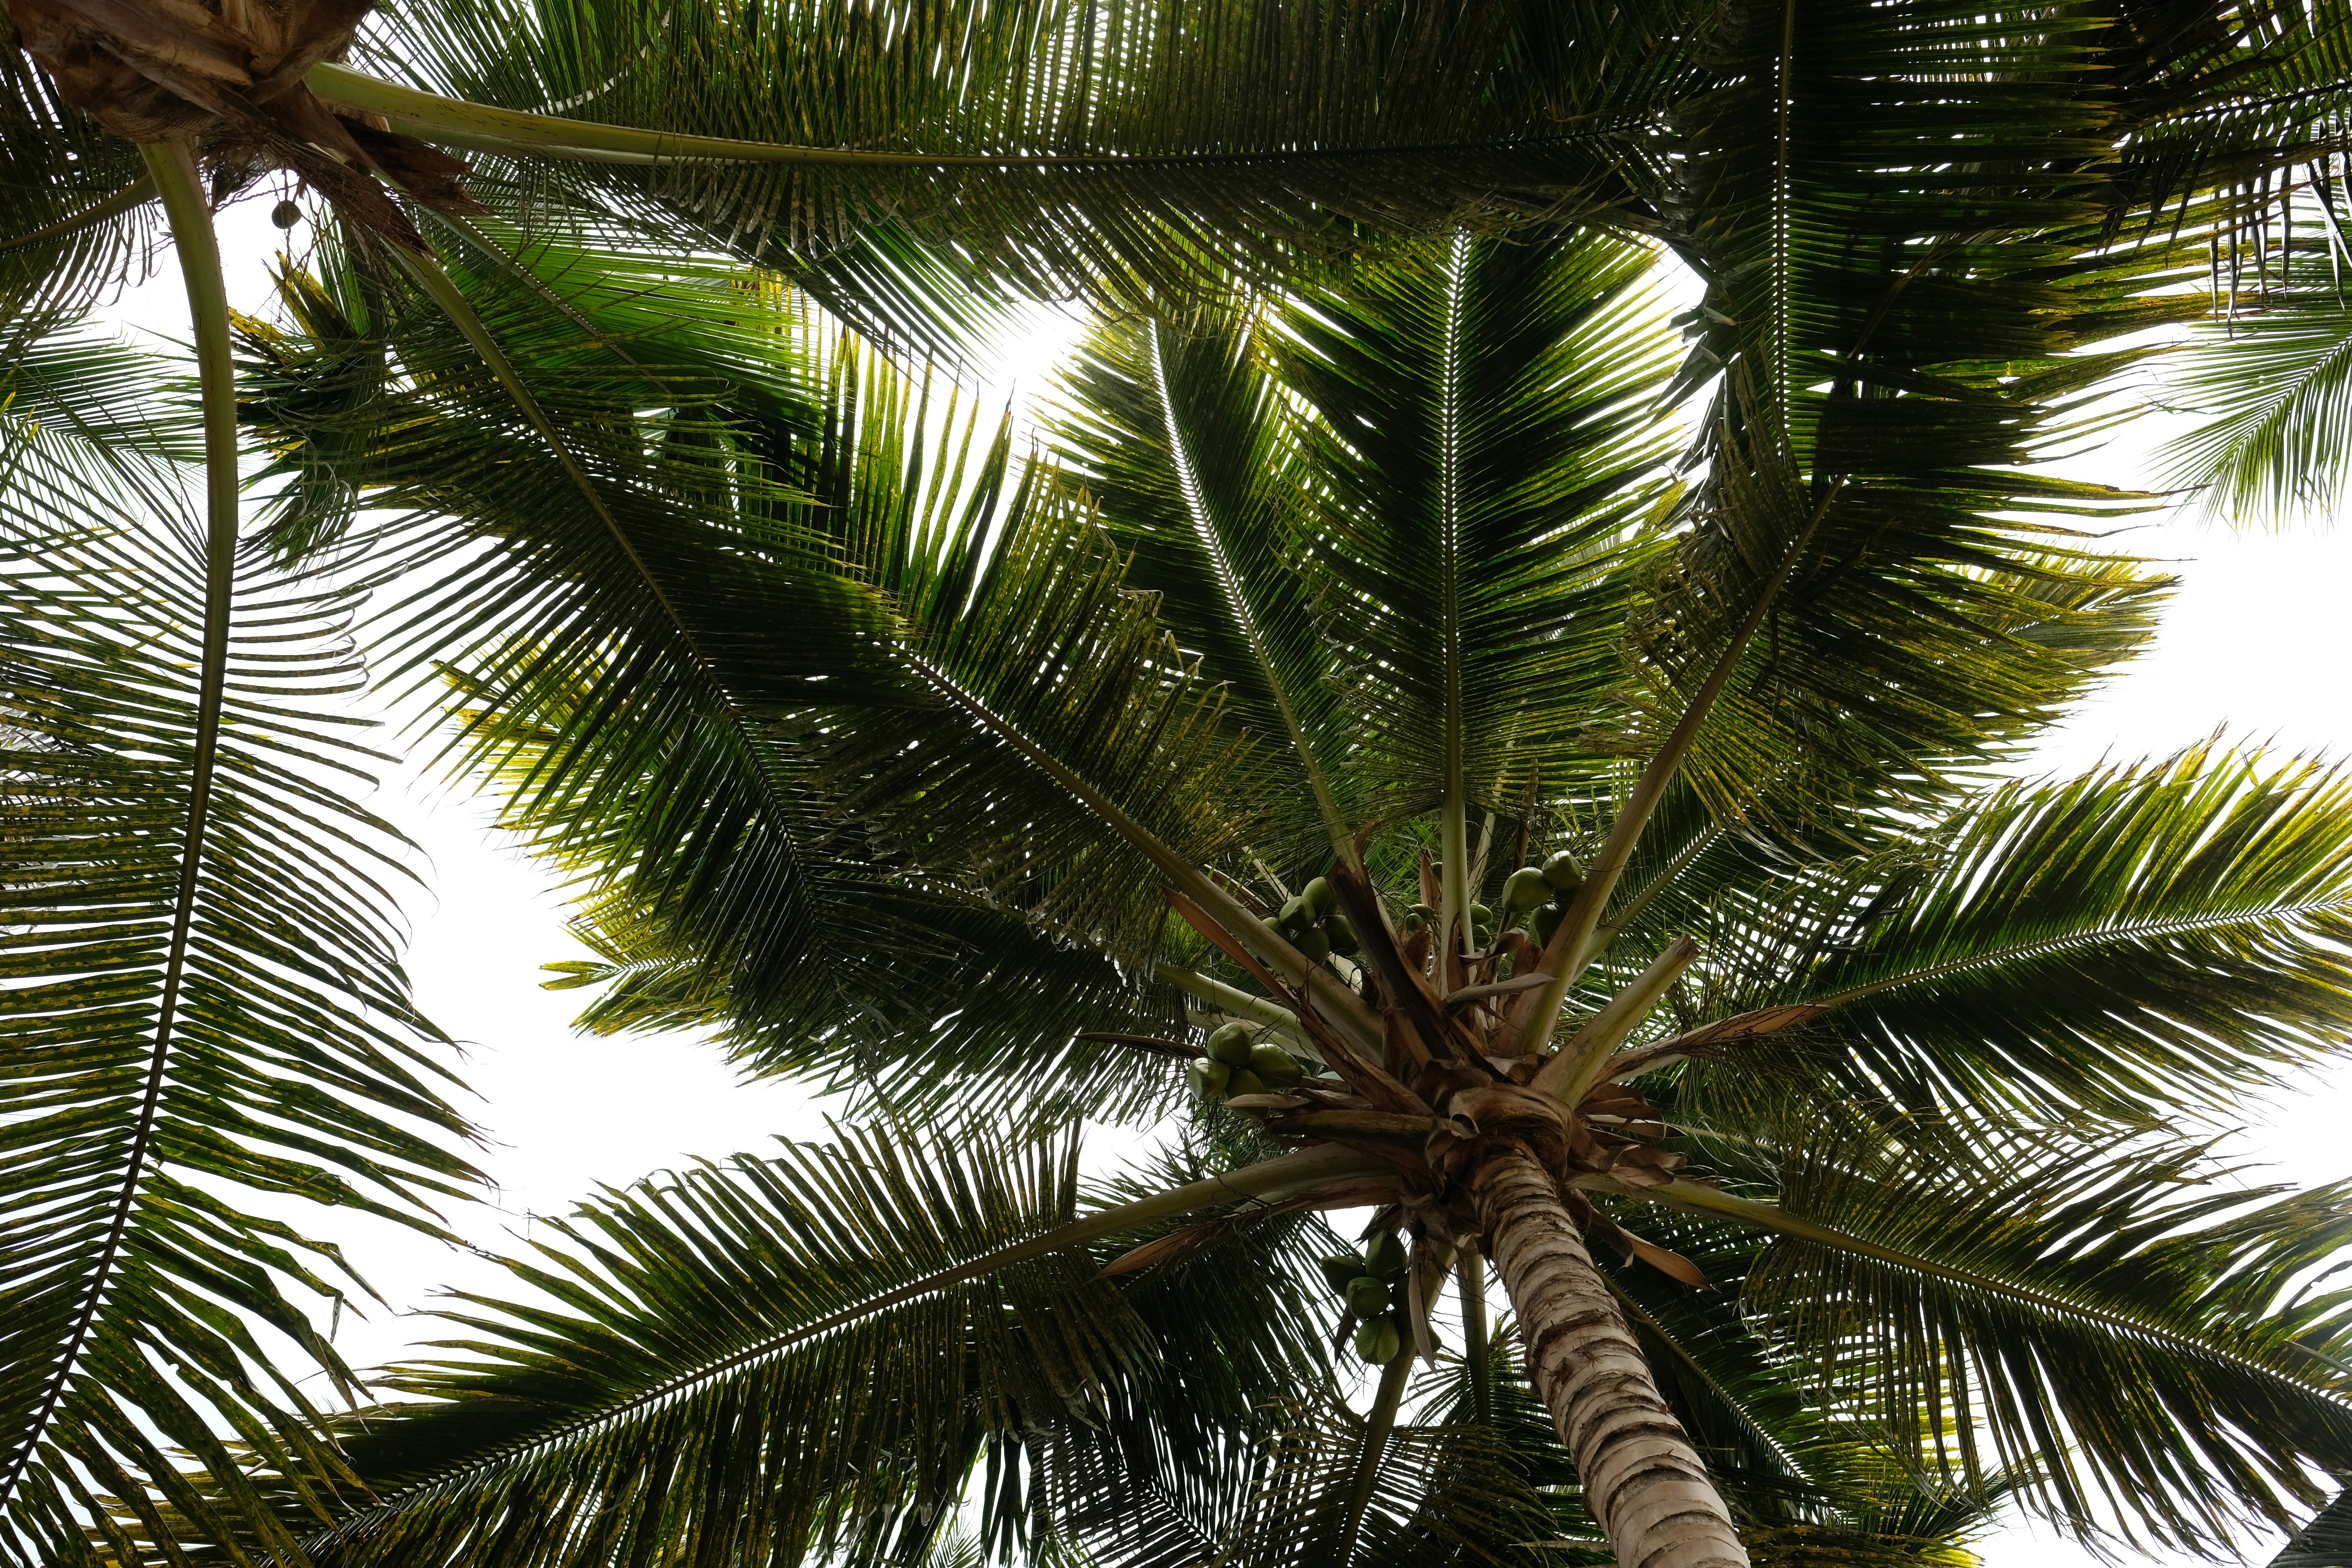 Choose from a curated selection of palm tree photos. Always free on Unsplash.